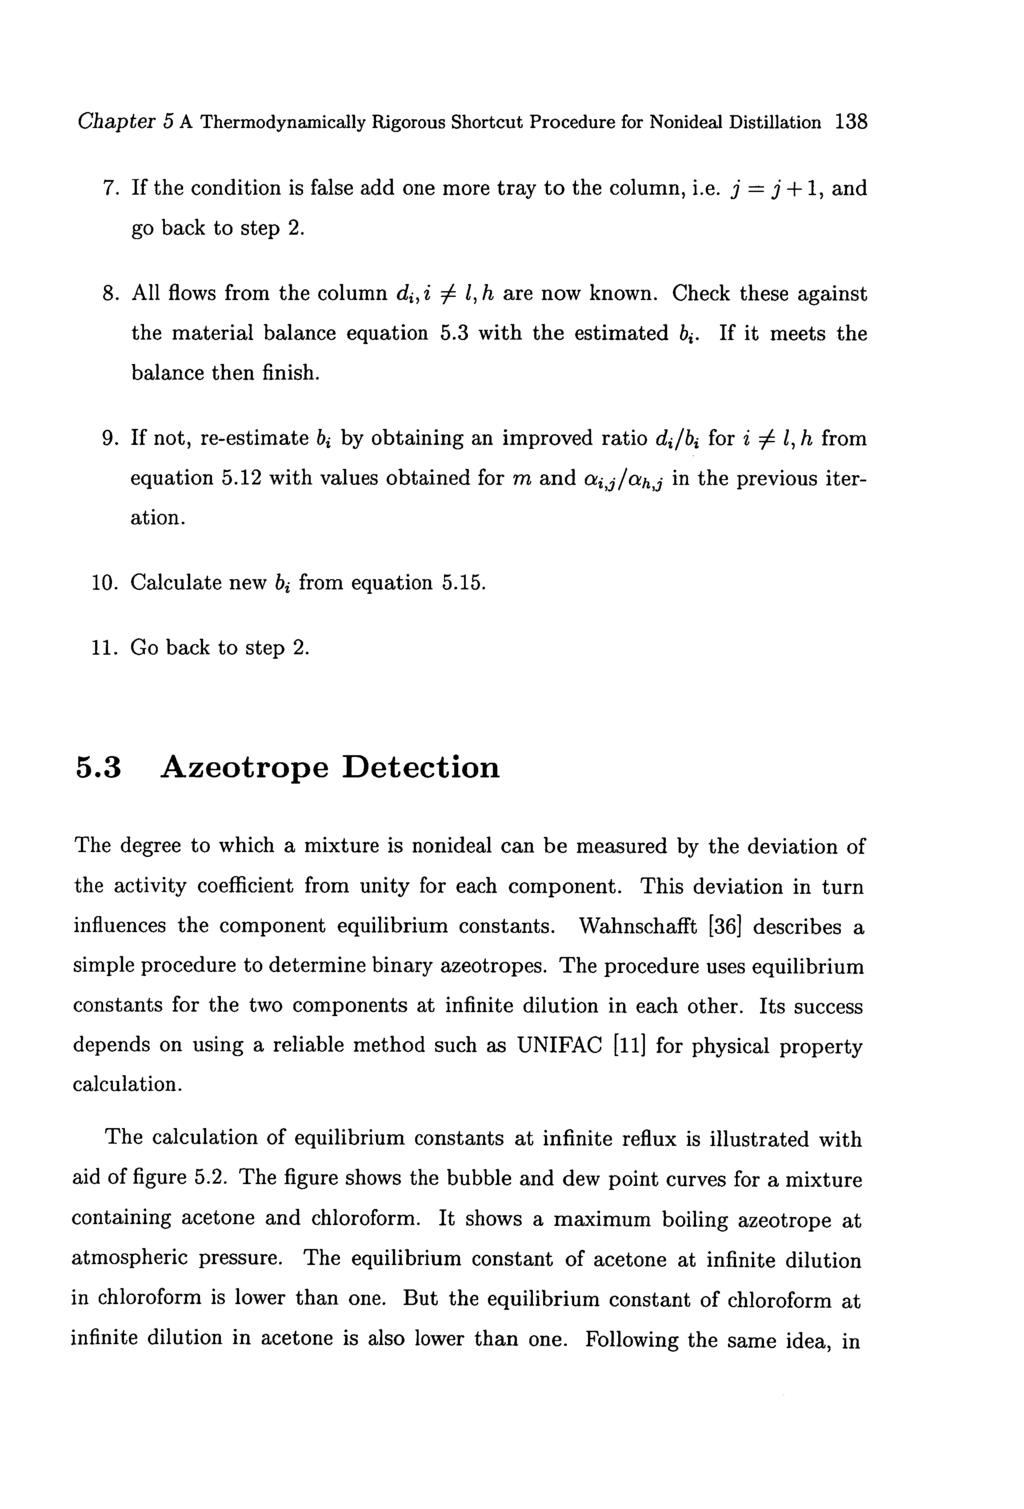 Chapter 5 A Thermodynamically Rigorous Shortcut Procedure for Nonideal Distillation 138 If the condition is false add one more tray to the column, i.e. j = j + 1, and go back to step 2.